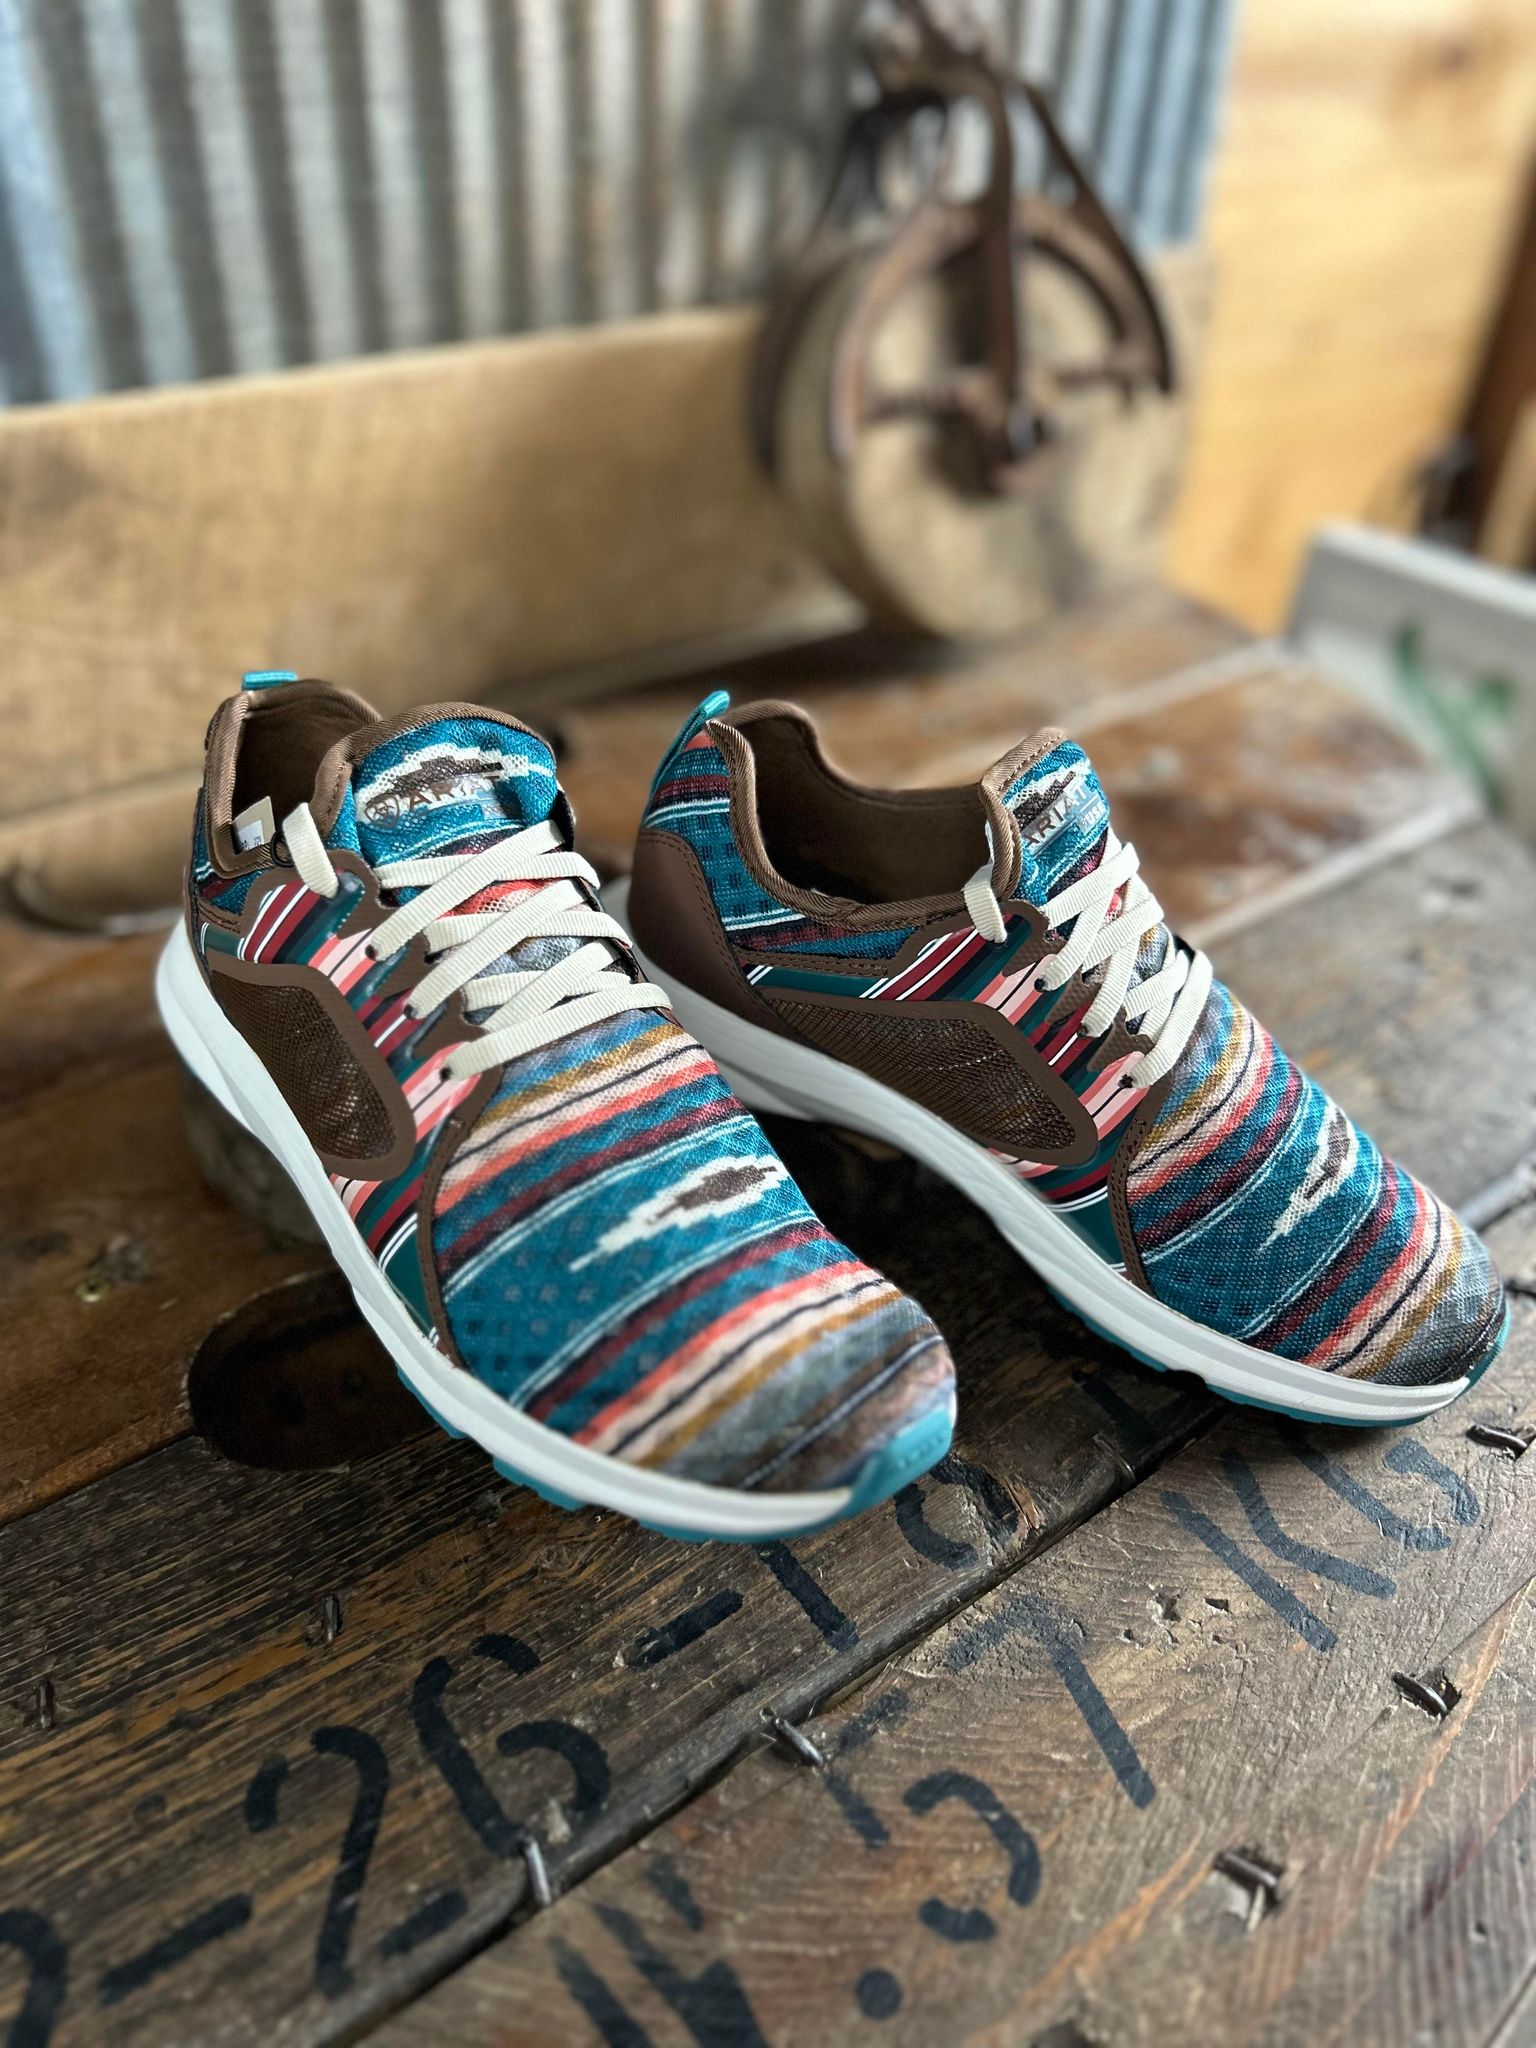 Women's Ariat Fuse Pastel Turquoise Serape Tennis Shoes *FINAL SALE*-Women's Casual Shoes-Ariat-Lucky J Boots & More, Women's, Men's, & Kids Western Store Located in Carthage, MO